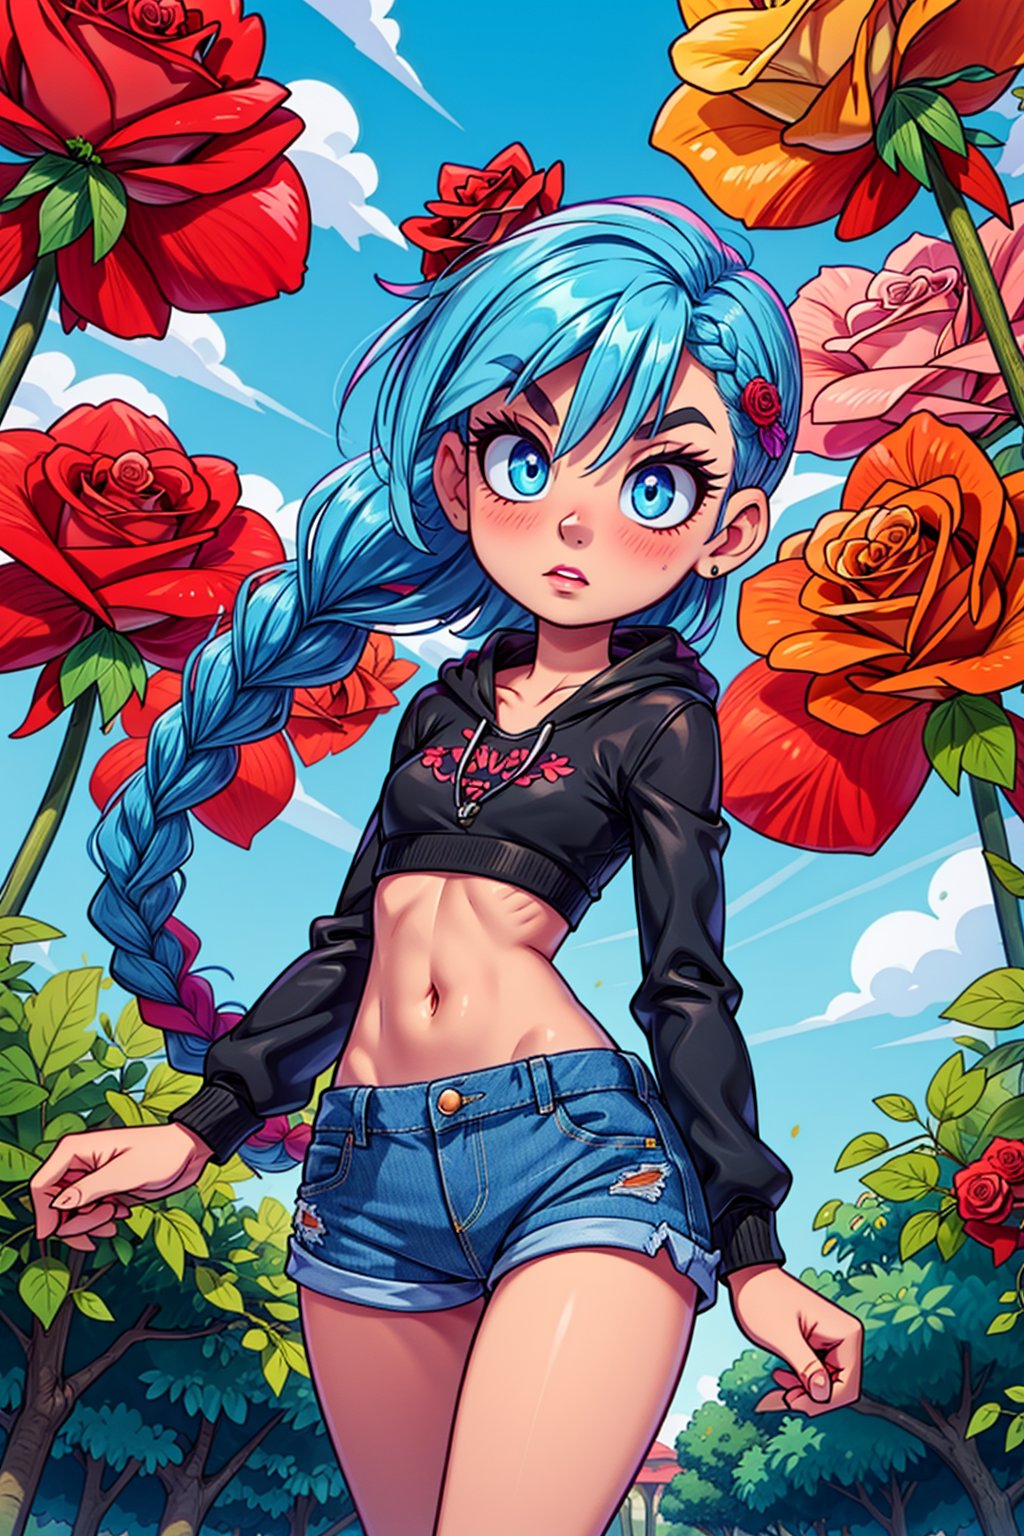 she wears a red rose as an ornament in her hair, HairRose, JinxLol, Narin, light_blue_hair, light_blue_eyes, (cowboy_shot:1.1), (eye_level_shot), (front vire, viewed_from_front)), jawline is softly defined, (big eyes:1.3), Full of details, Highly detailed, Detailed face, serious expression, denim shorts with worn edges, walking, midriff, bare_midriff, pink lipstick, full lips, very narrow waist, hourglass body shape,shine eyes01, looking_at_viewer, ((background of a natural path full of plants, trees and roses)), hands down, perfect,

"((Jinx walks)) calmly for a natural path full of plants, trees and roses wearing ((raw-edged denim shorts)) and a ((crop top)), her beautiful ((eyes shine)) and the wind plays with her ((long braided hair)) and she wears a rose as an ornament in her hair",perfect,HairRose